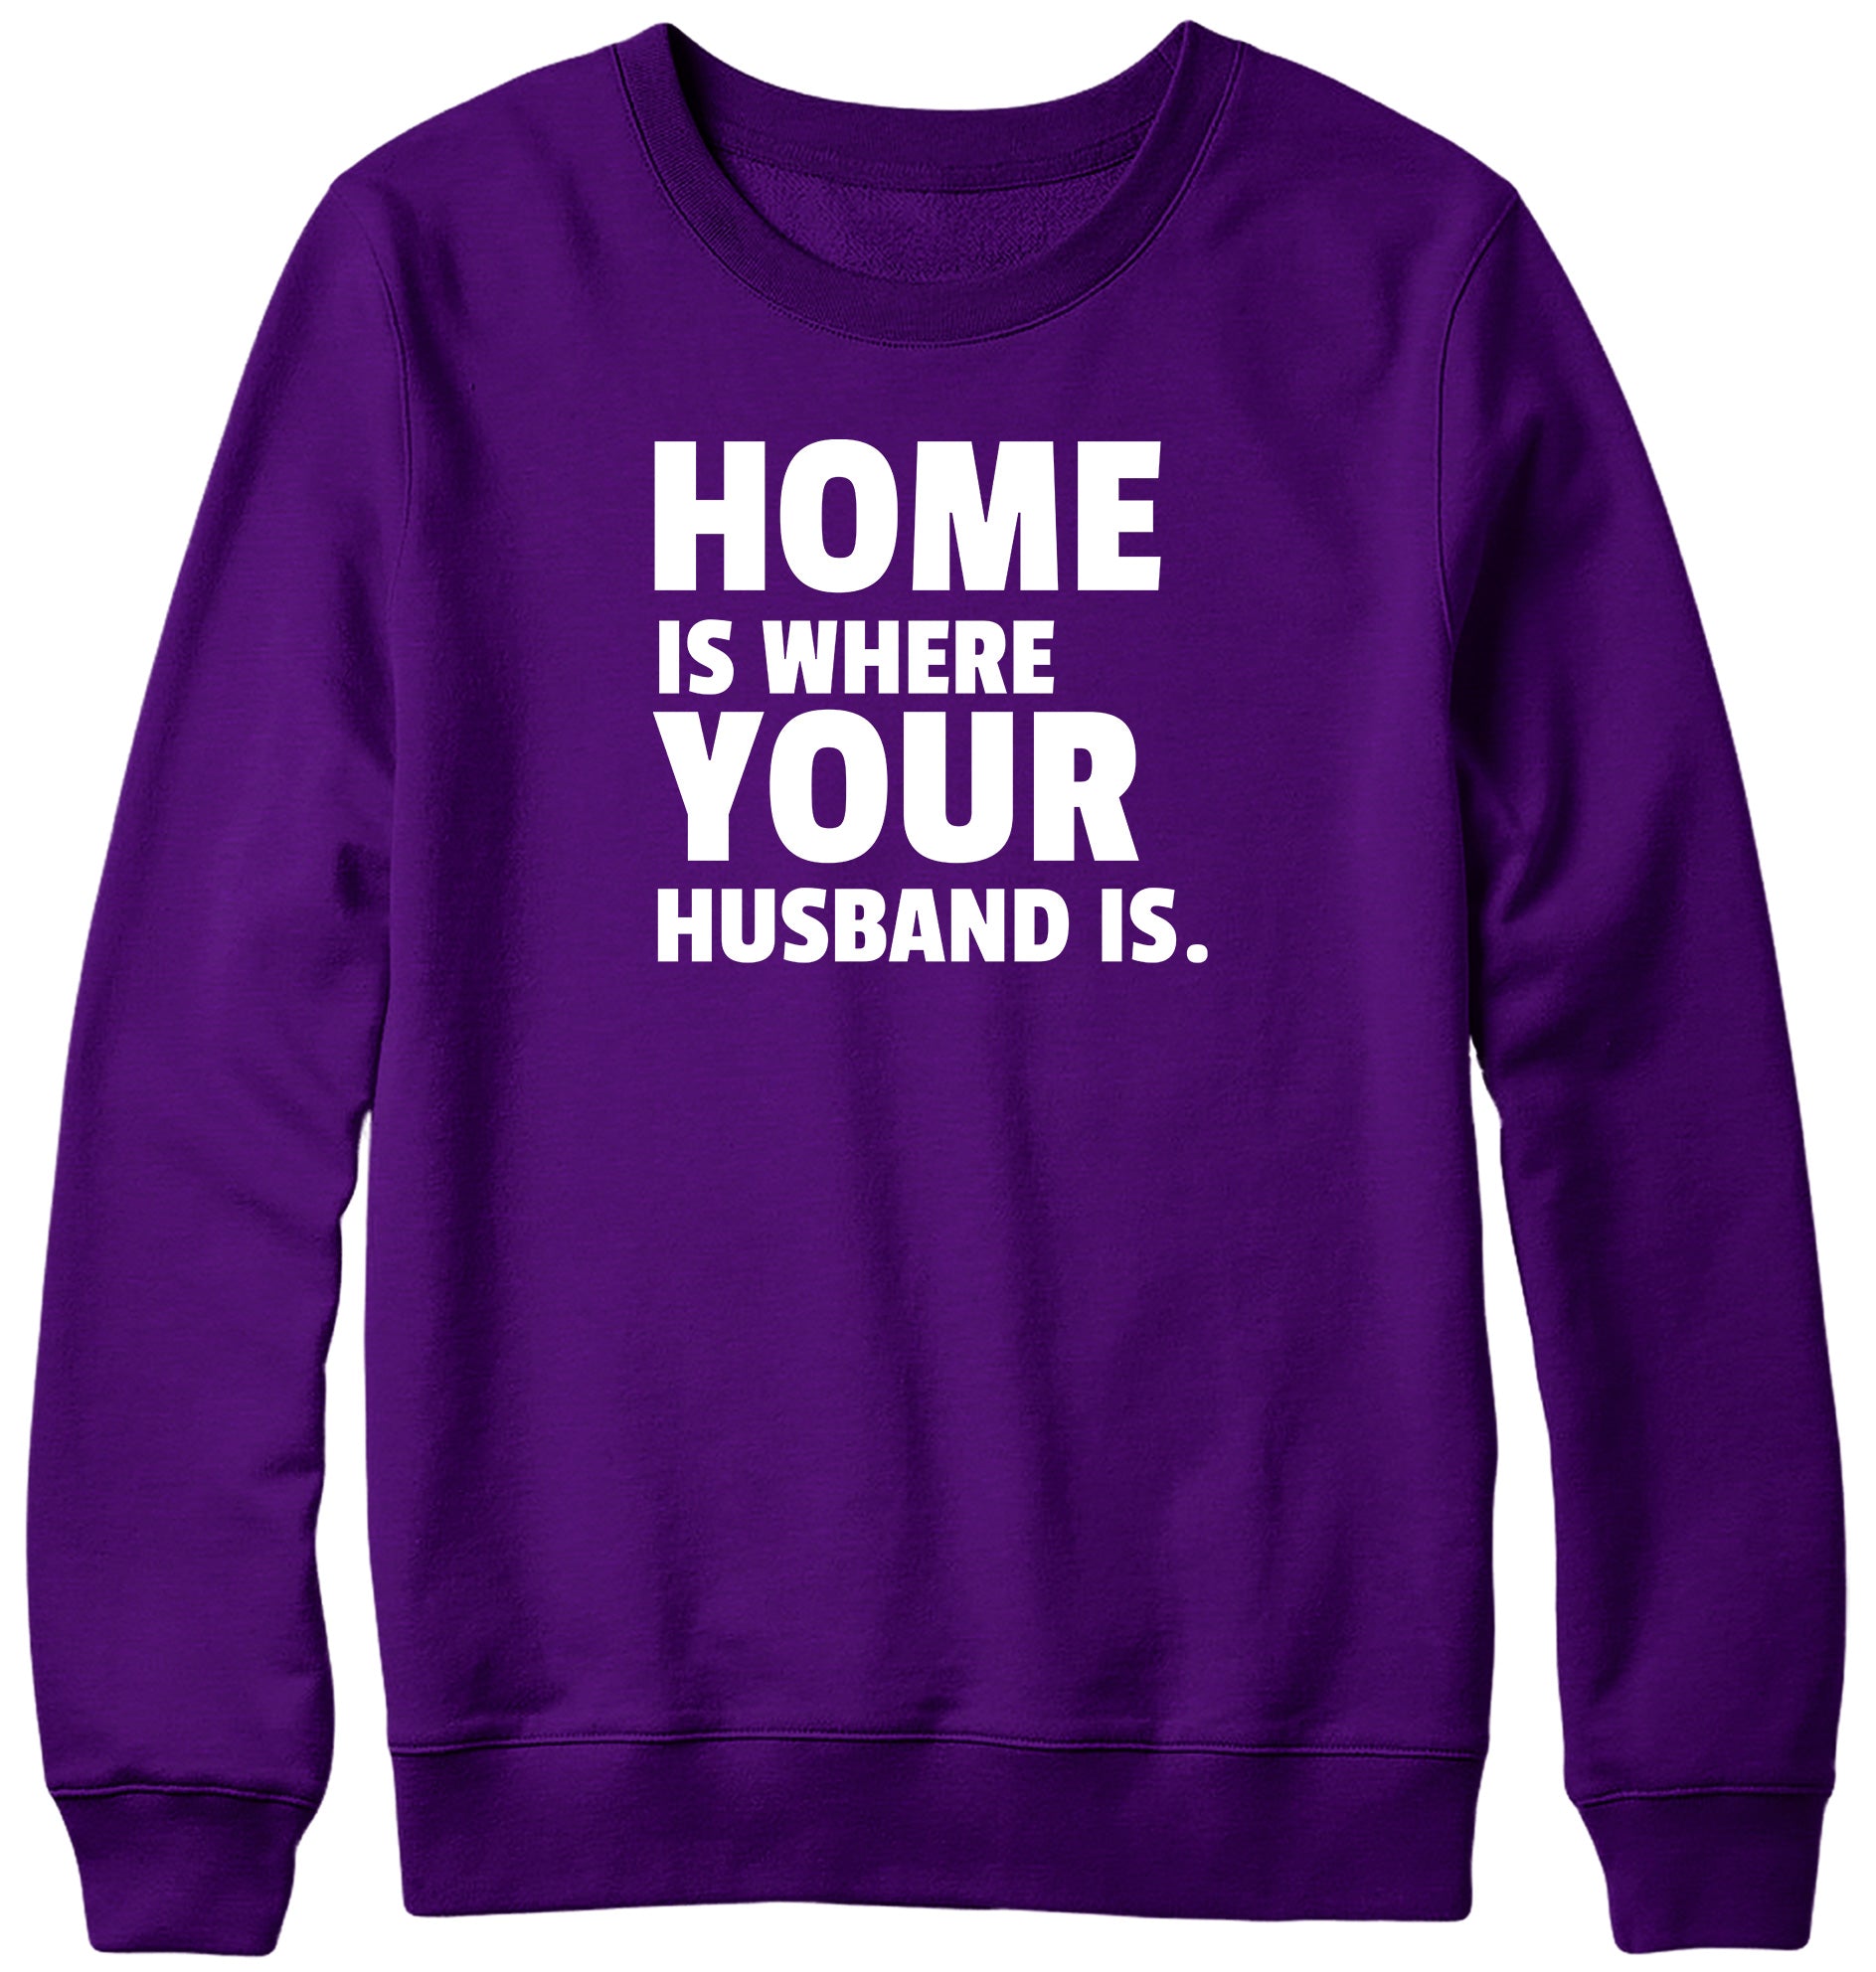 HOME IS WHERE YOUR HUSBAND IS MENS LADIES WOMENS UNISEX SWEATSHIRT SWEATER